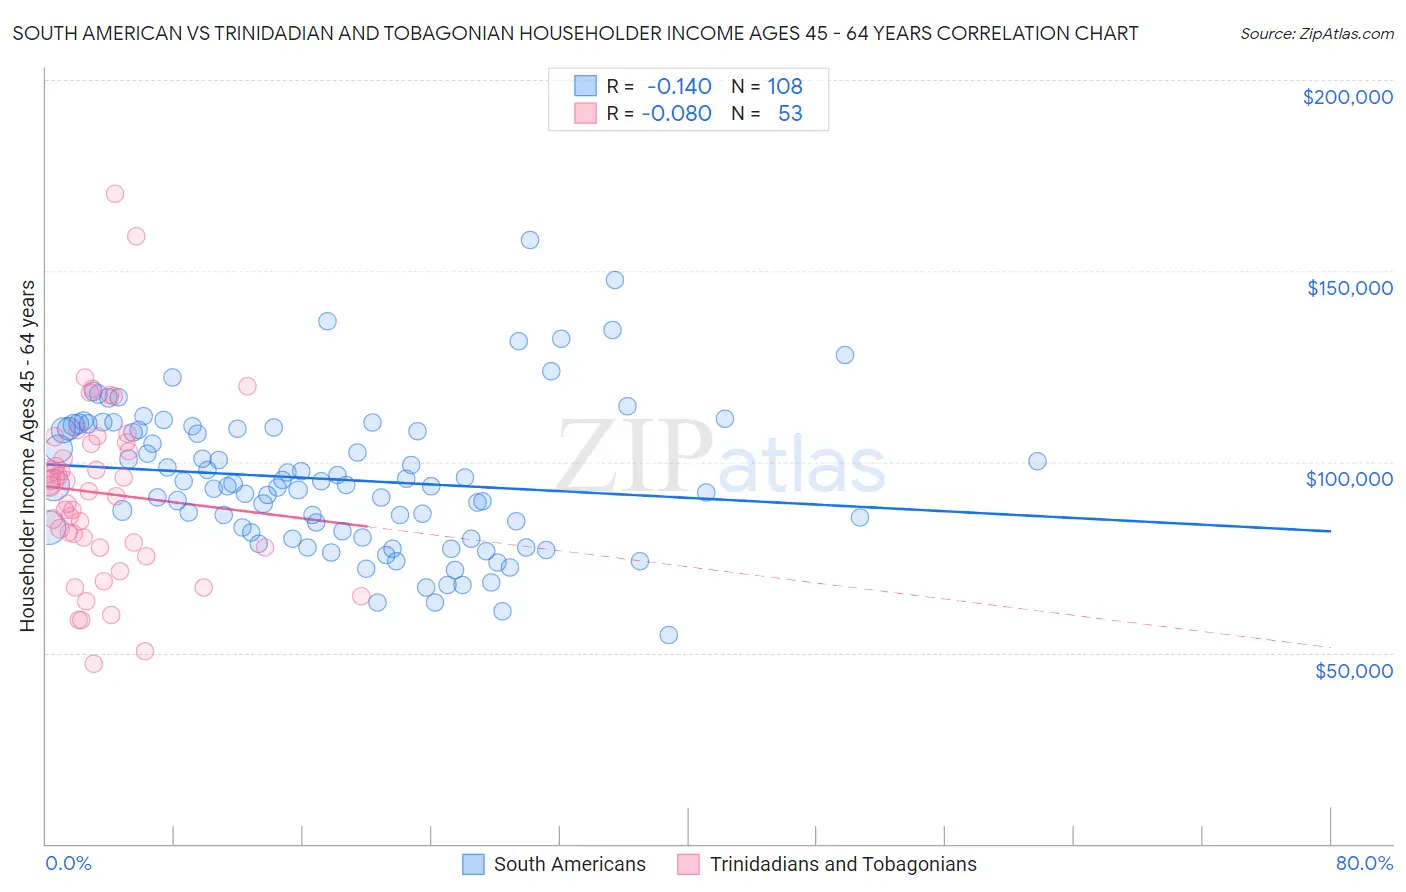 South American vs Trinidadian and Tobagonian Householder Income Ages 45 - 64 years